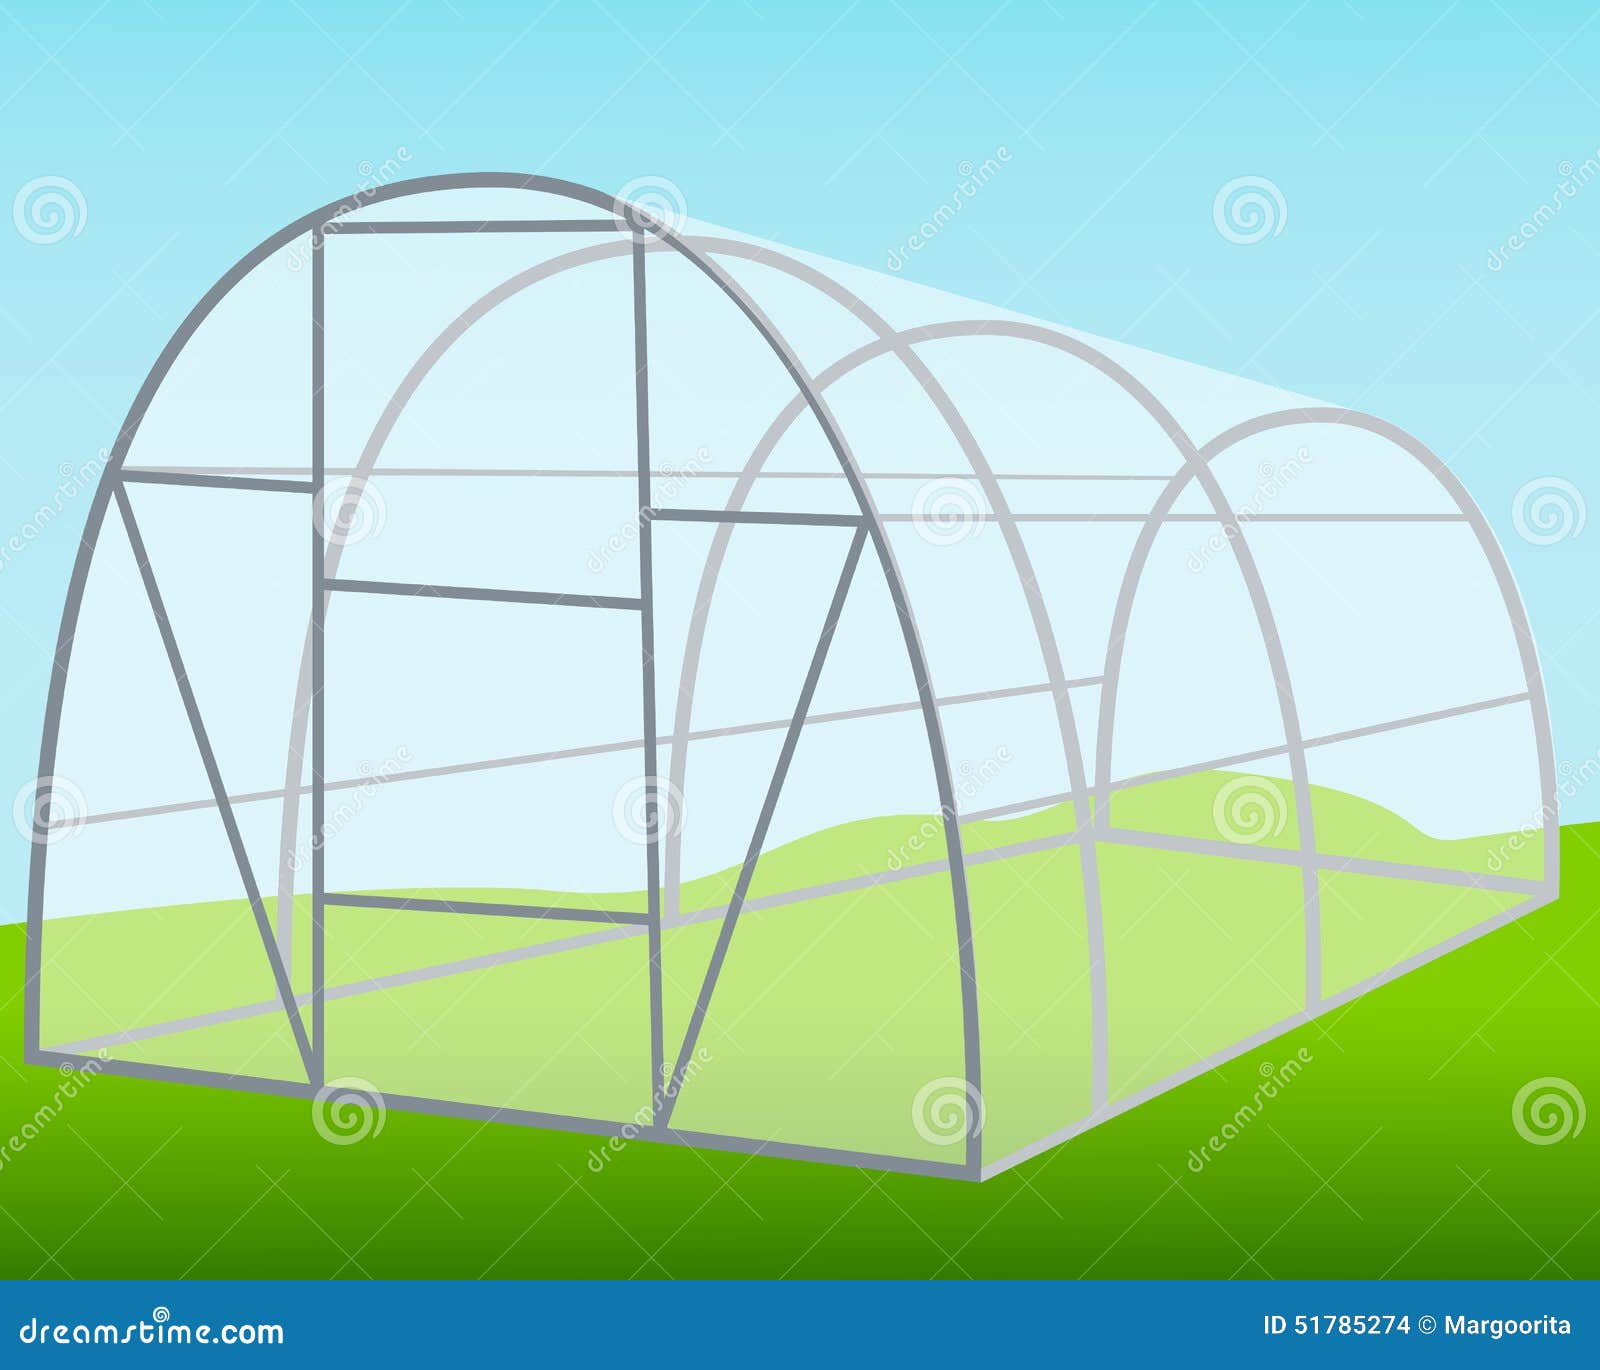 greenhouse clipart - photo #29